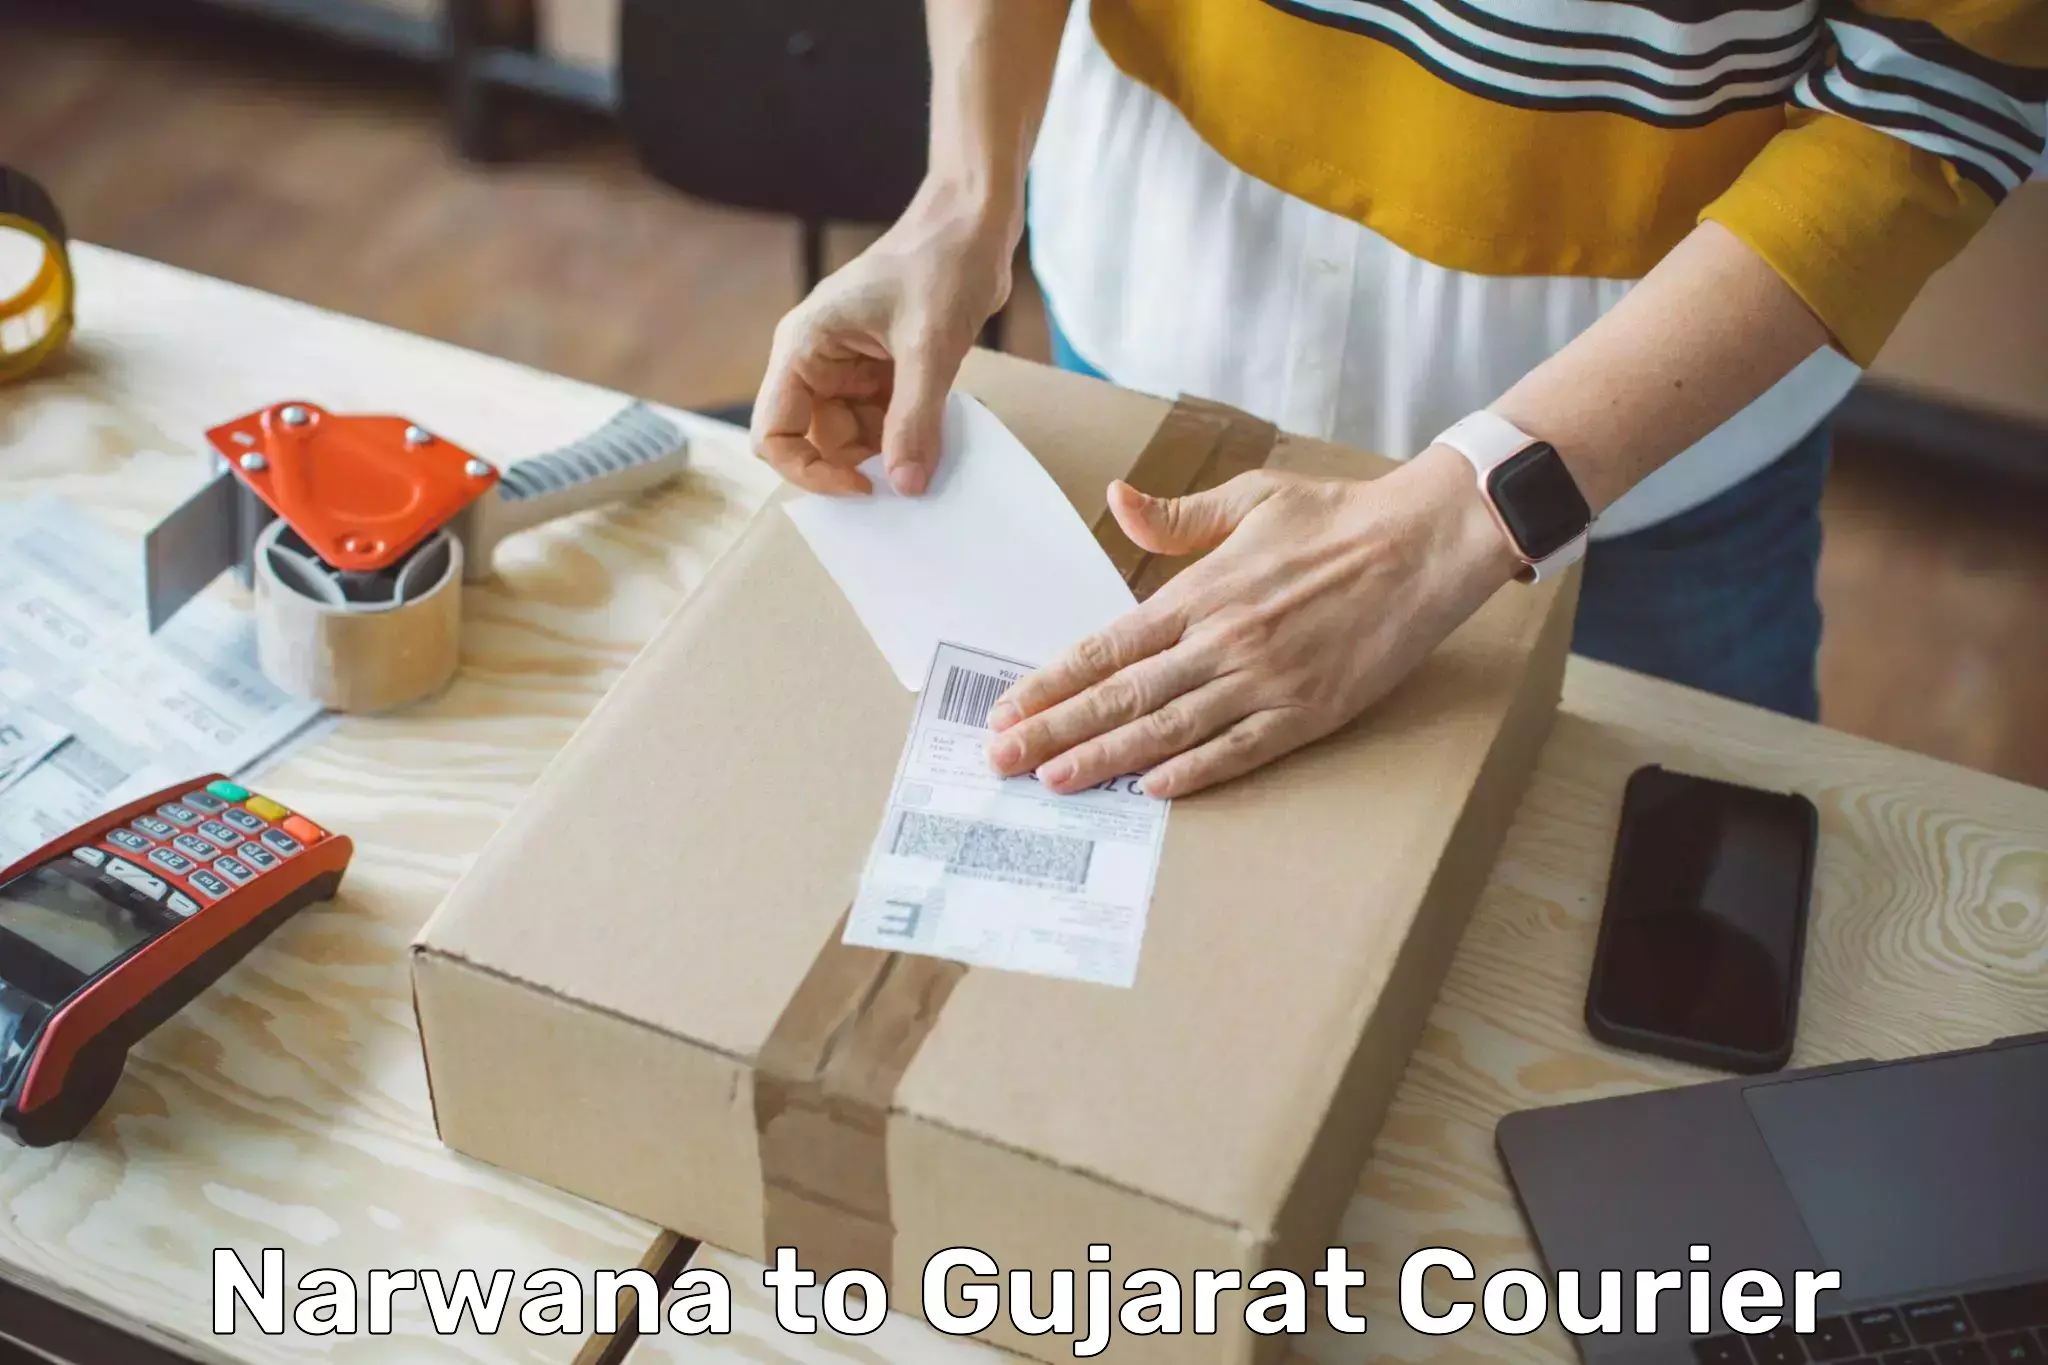 Reliable delivery network Narwana to Gujarat